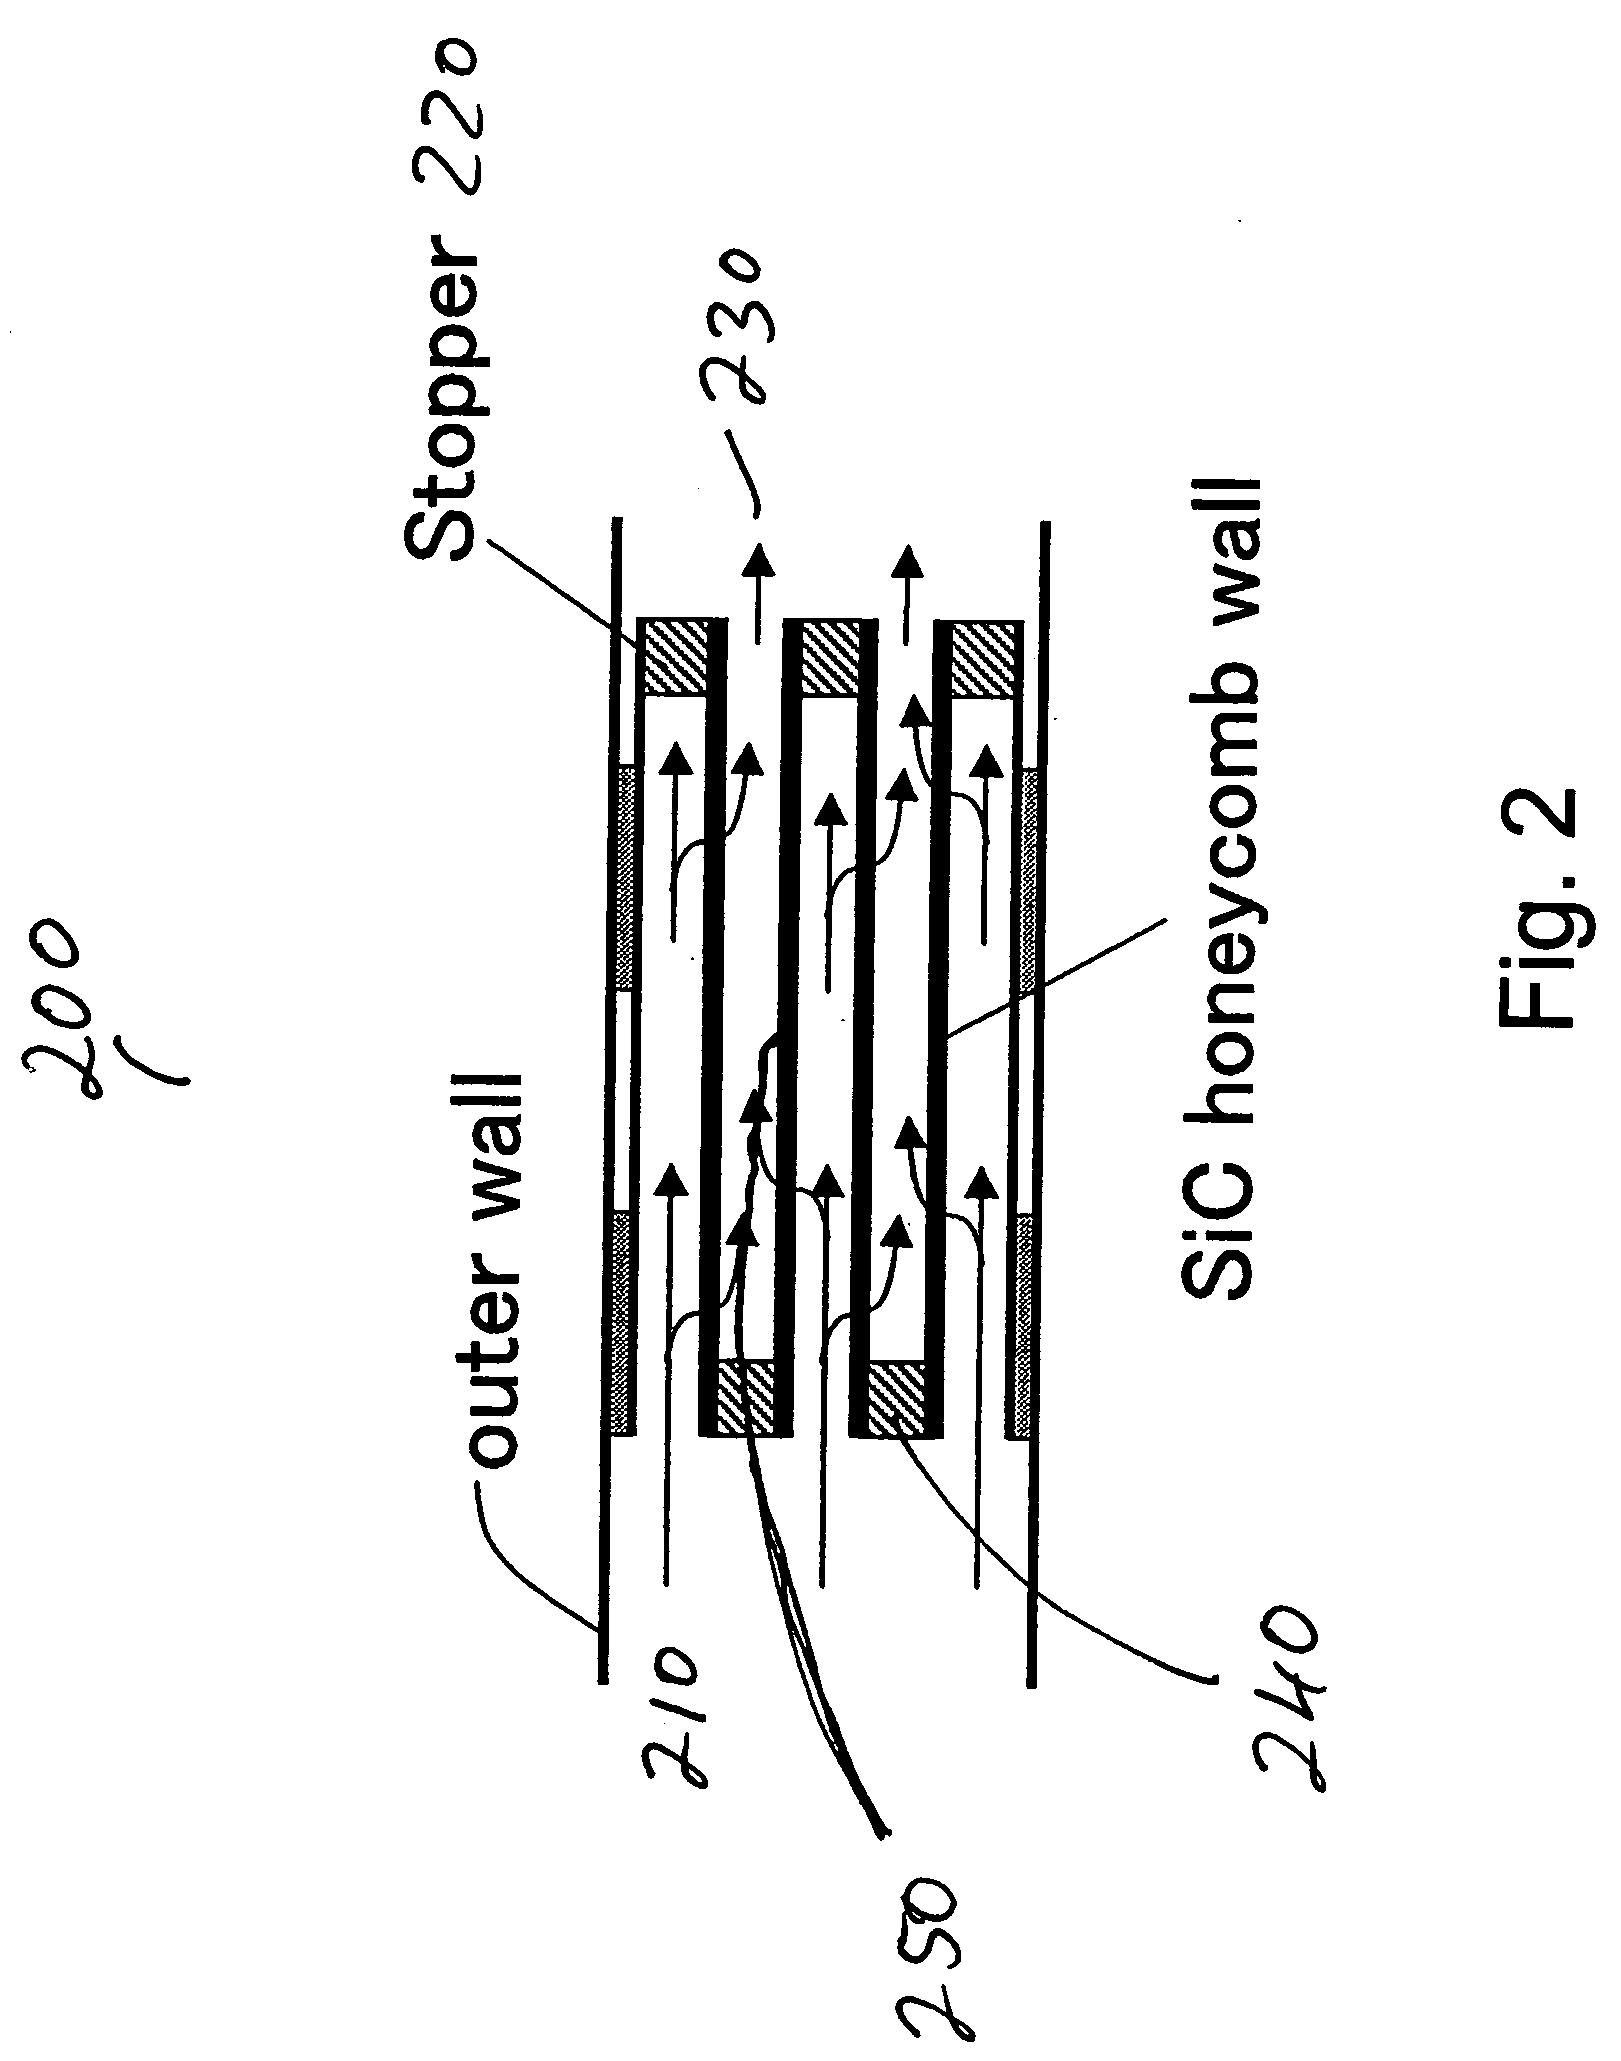 Fuel processing system for reforming hydrocarbon fuel